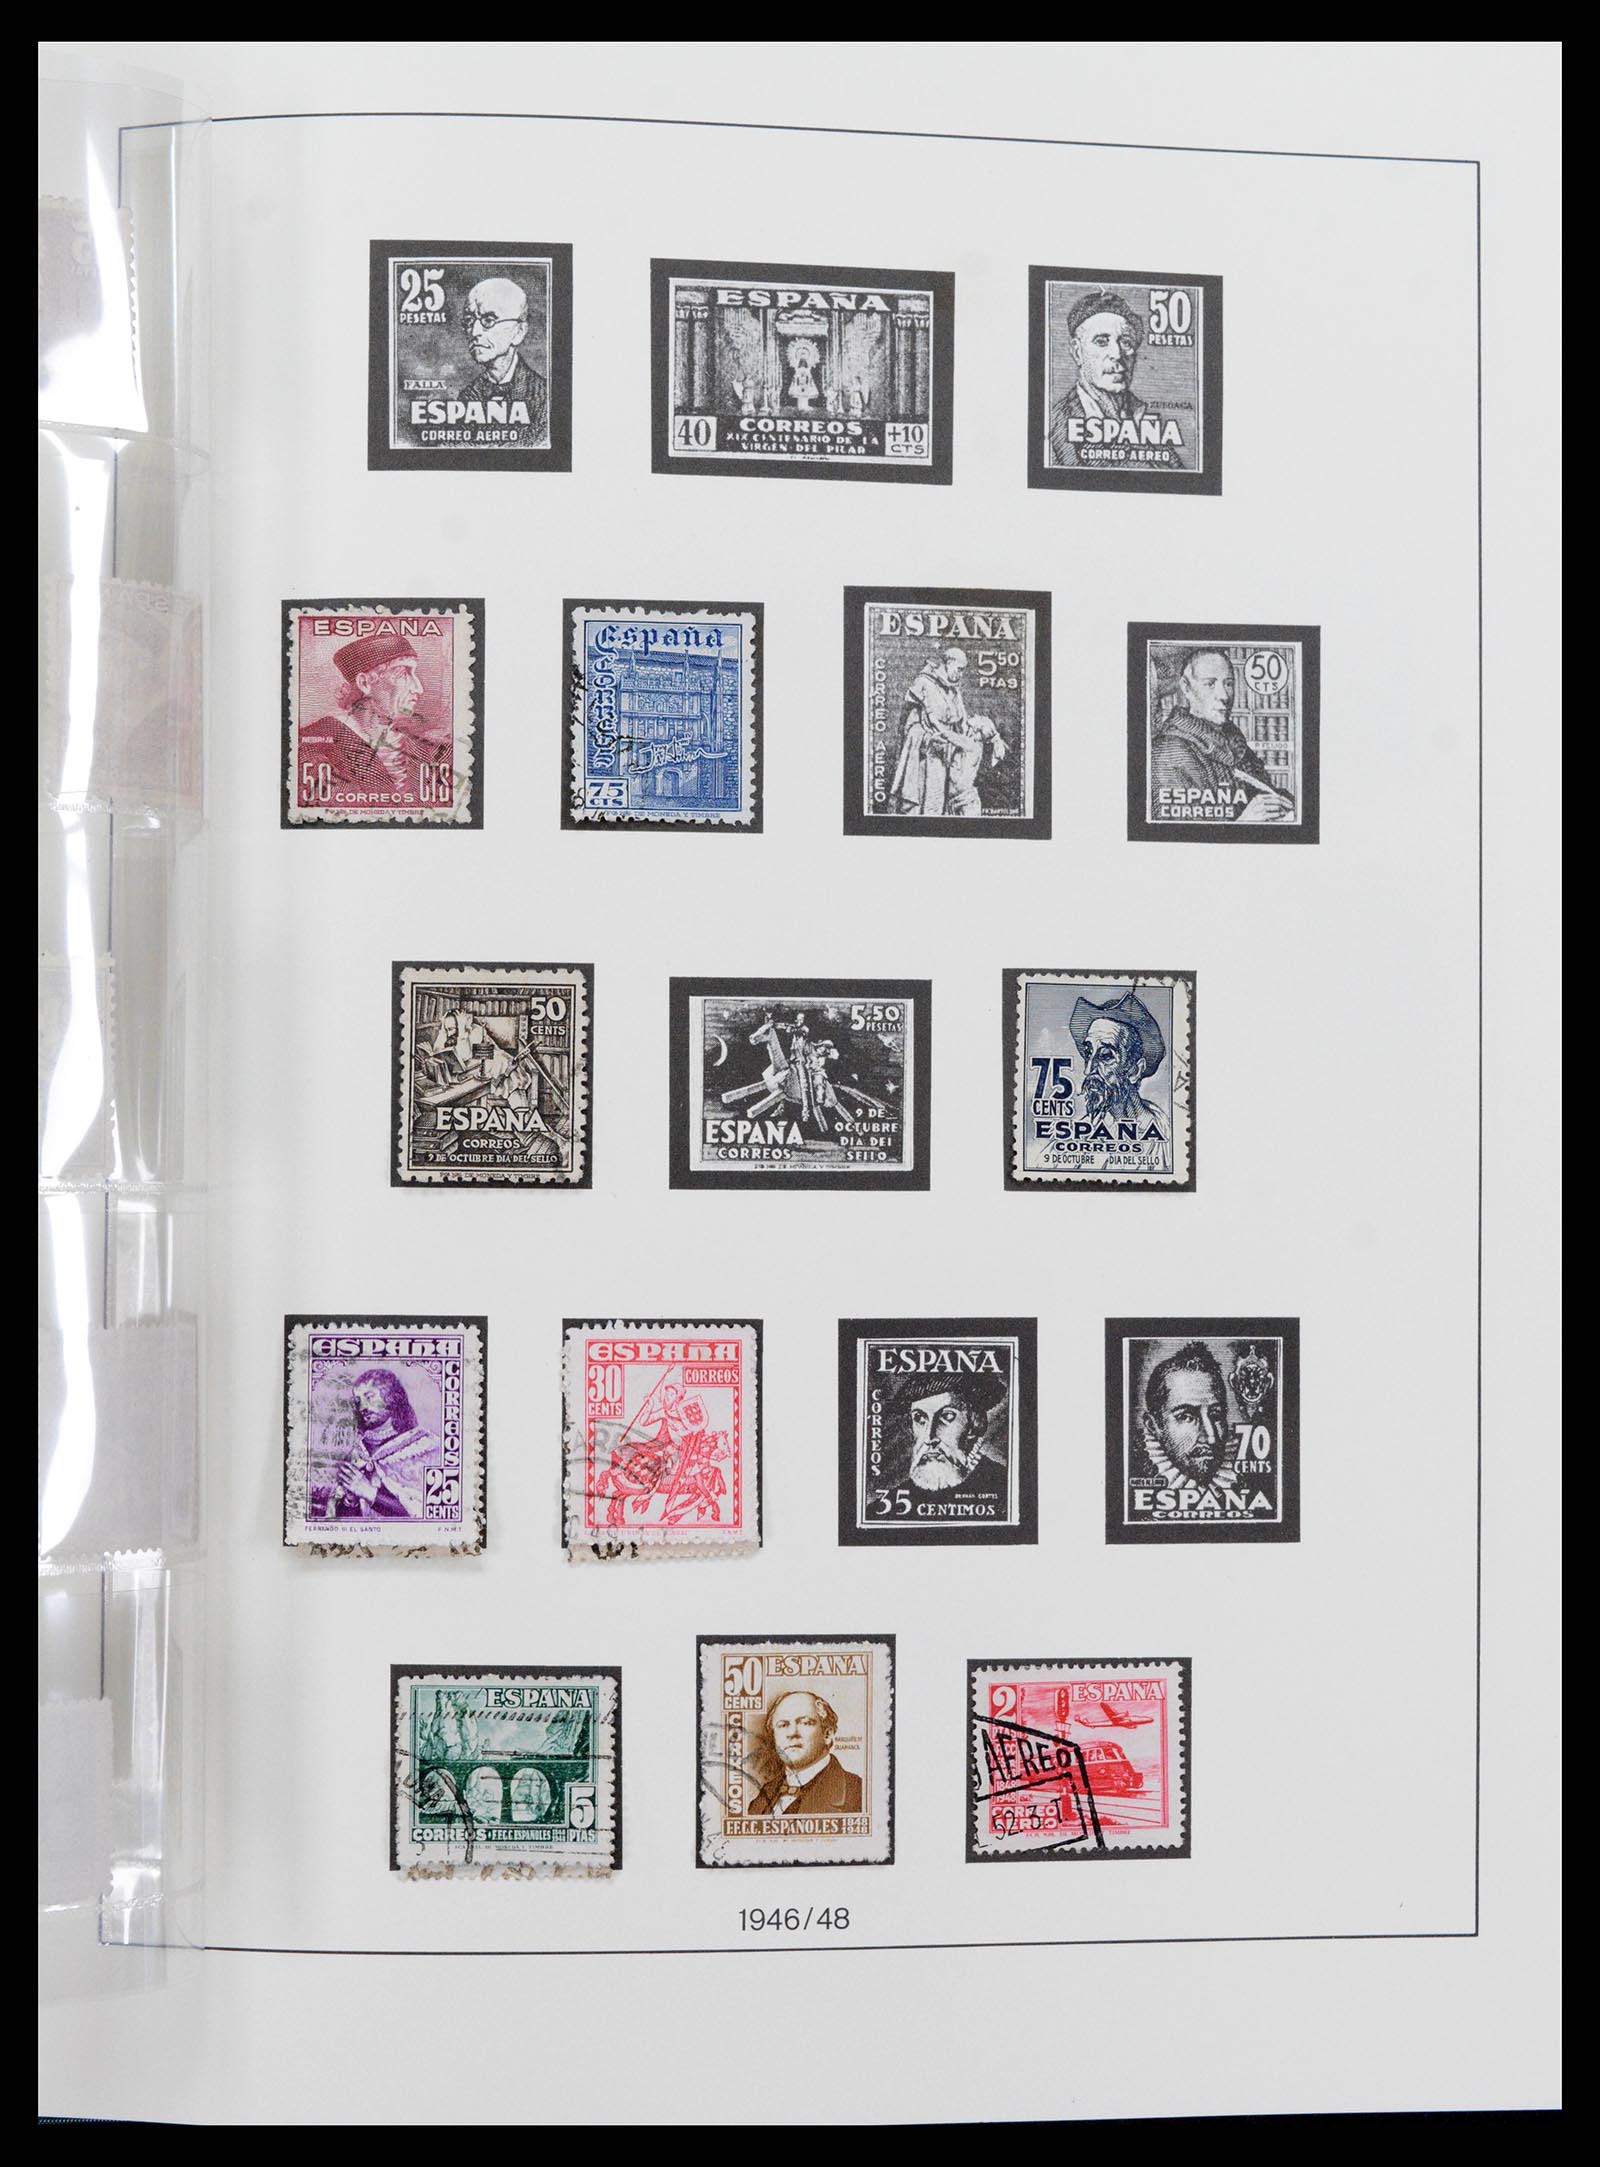 37126 126 - Stamp collection 37126 Spain and colonies 1850-1976.